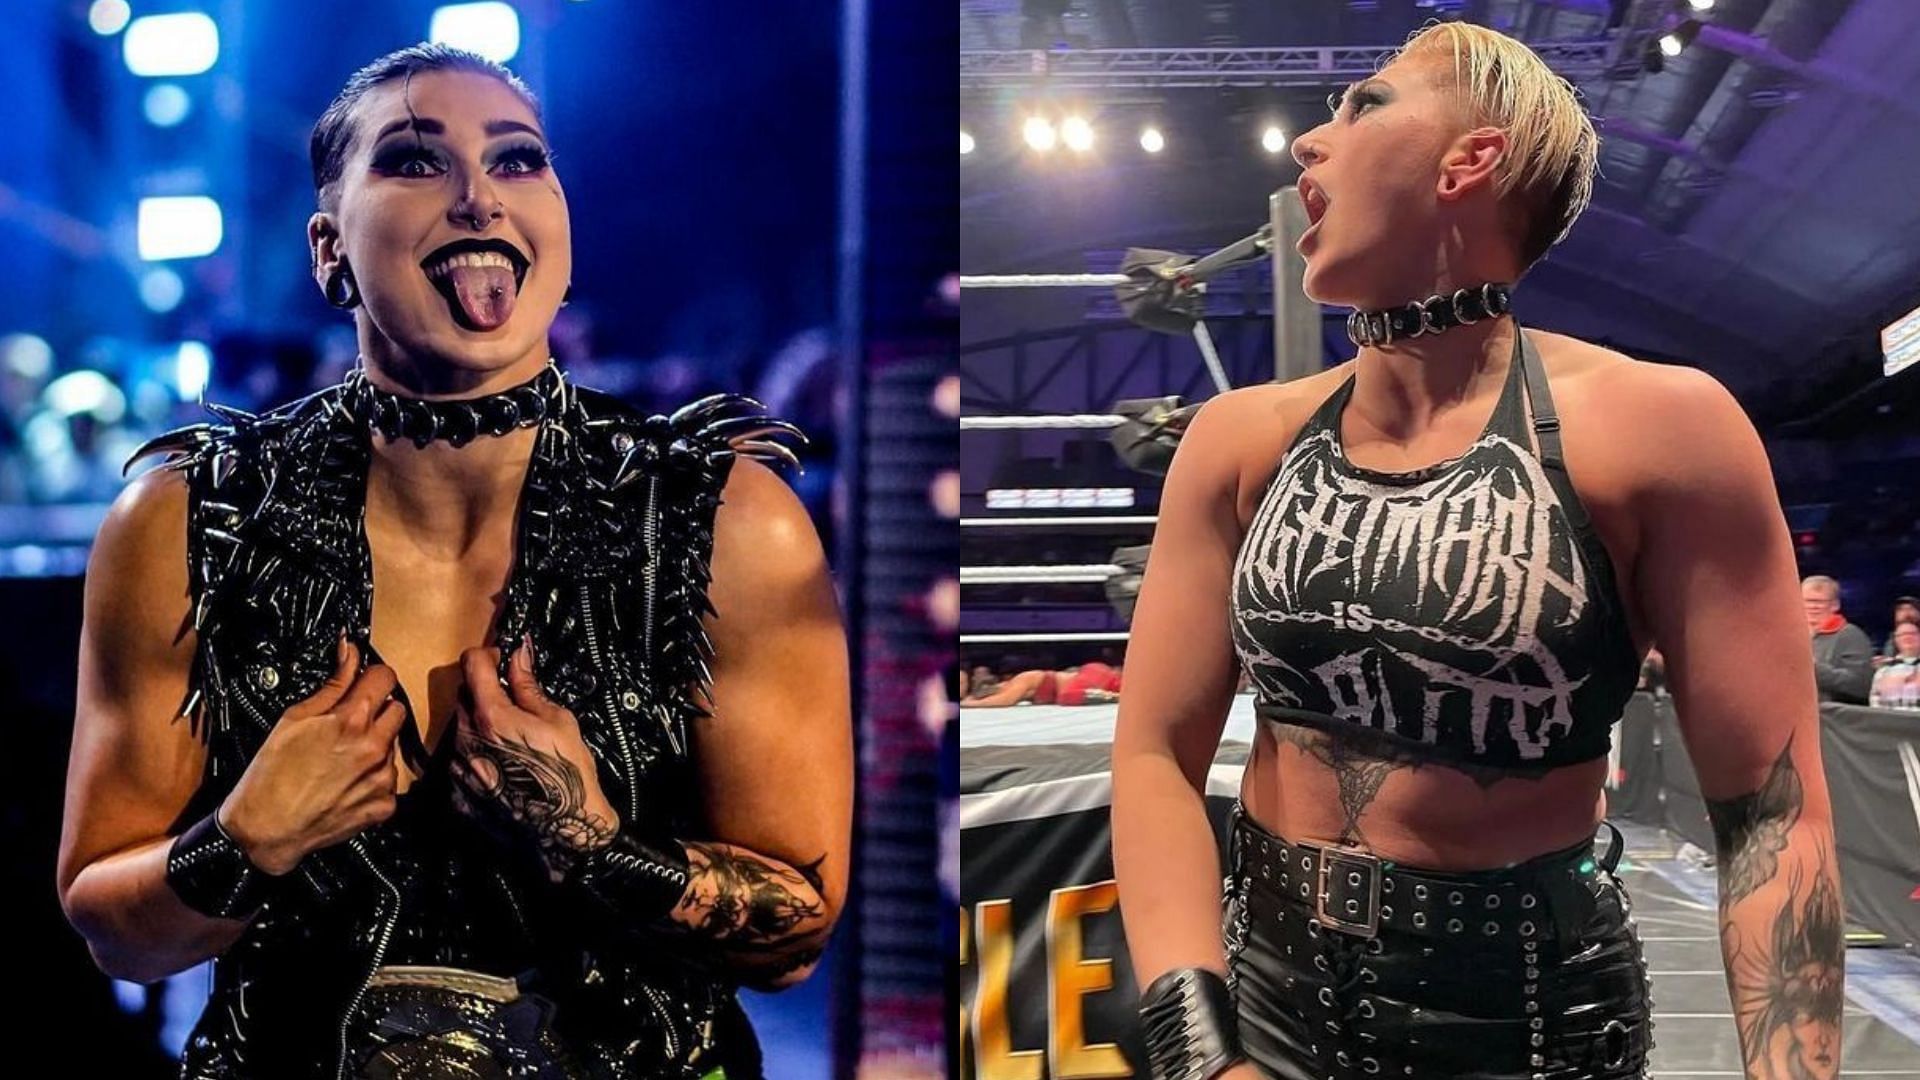 Judgment Day member Rhea Ripley is currently feuding The OC